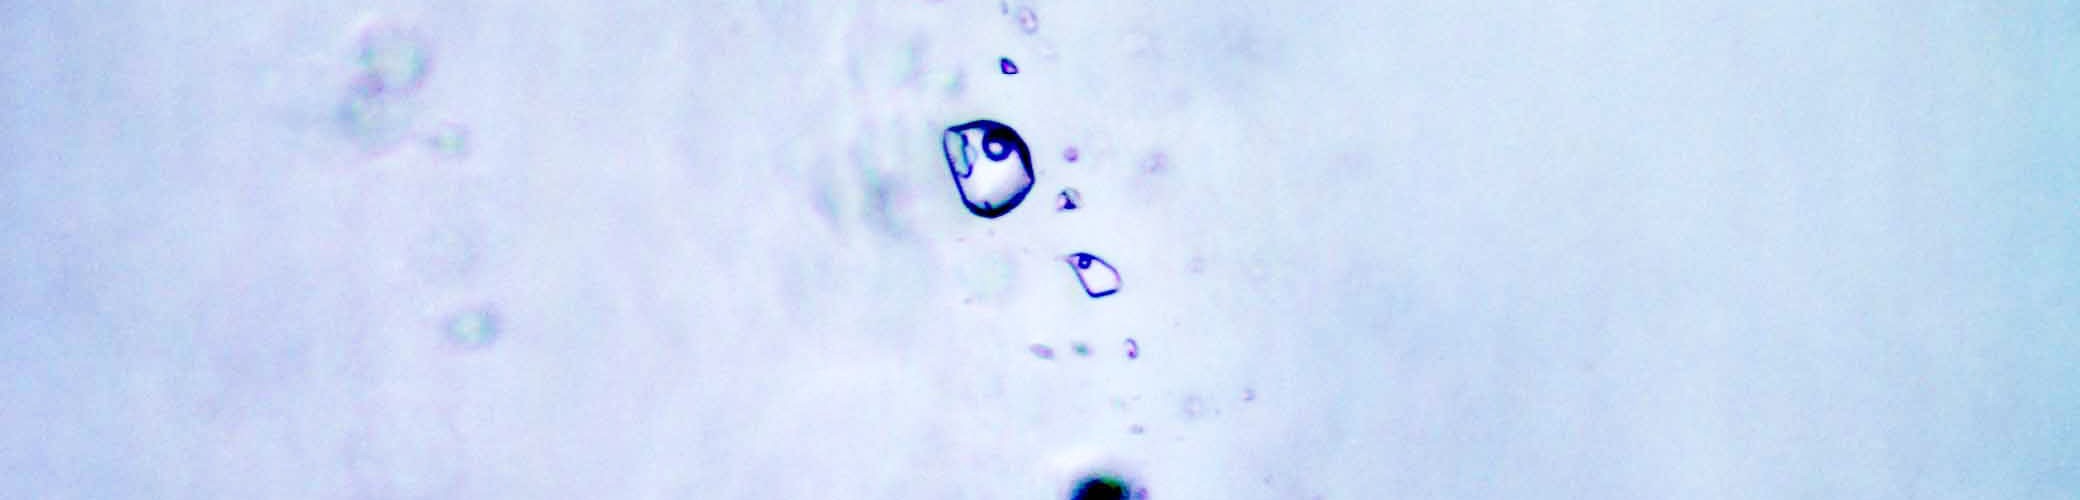 Fluid inclusions image 3 - microthermo